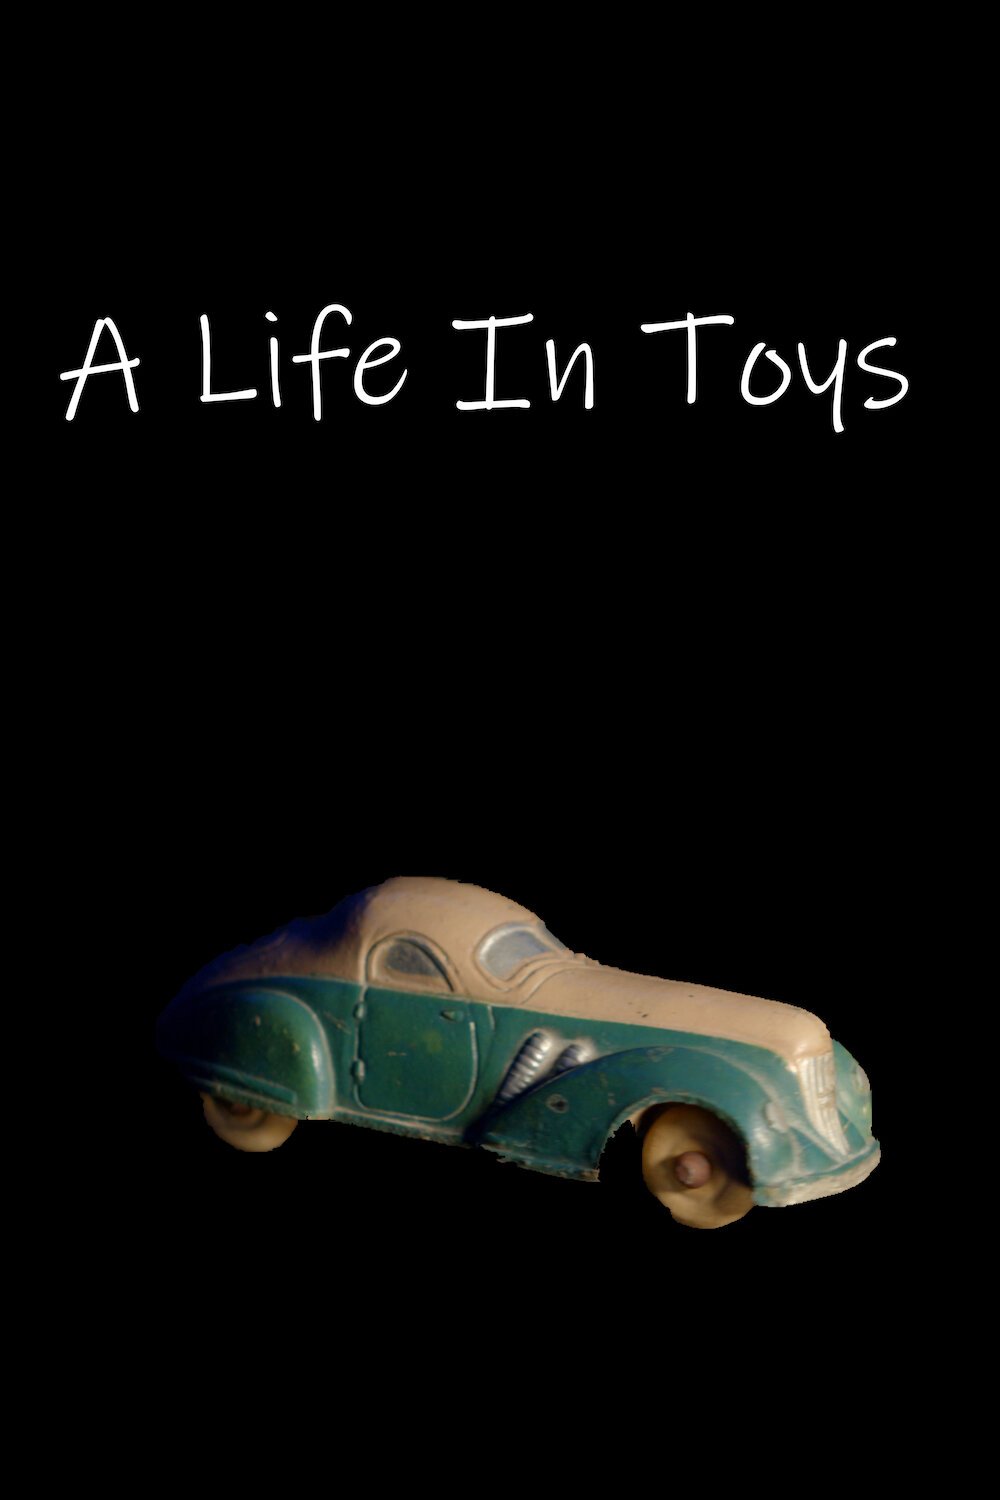 A Life in toys - Poster